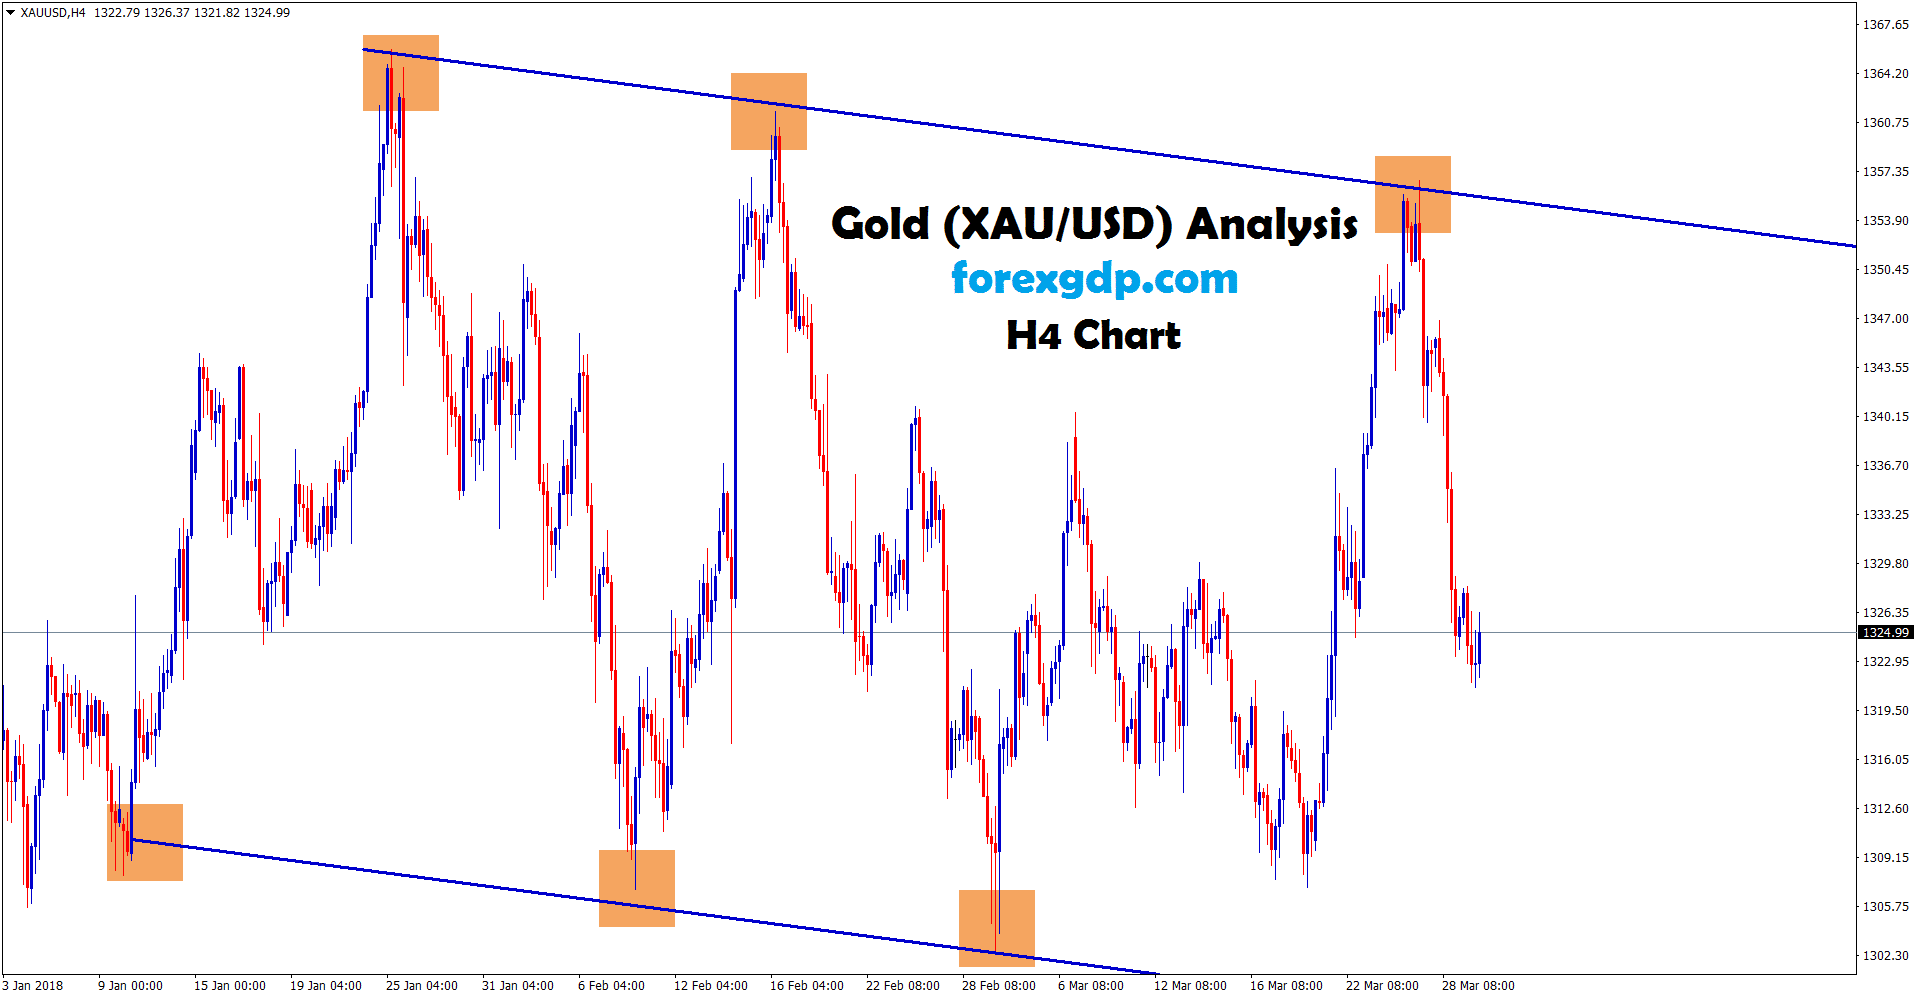 H4 chart gold moving between the ranges